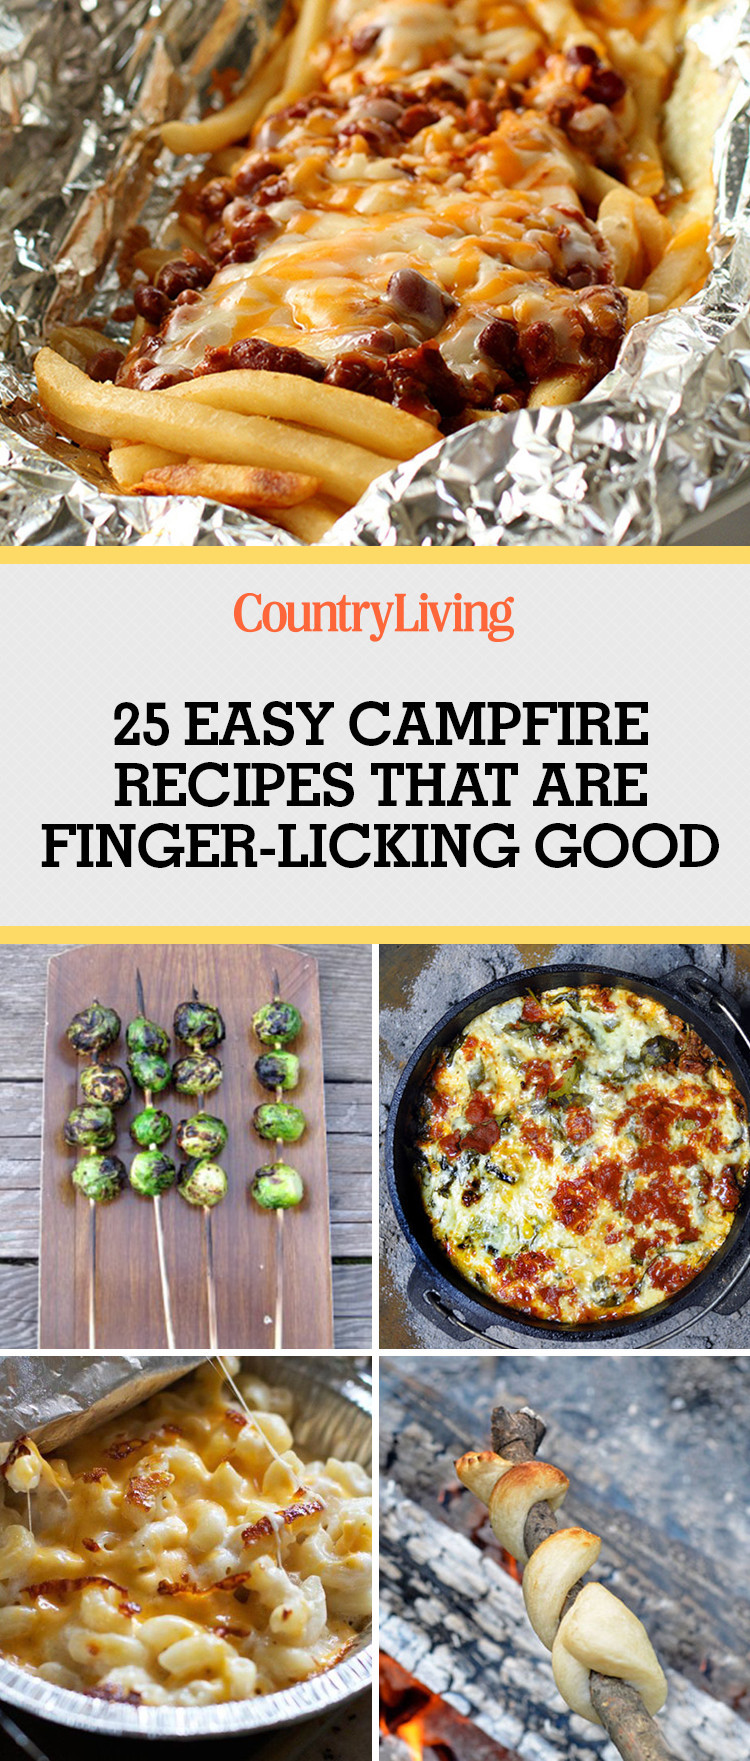 Easy Camping Dinner Ideas
 28 Best Campfire Recipes Easy Camping Food Ideas